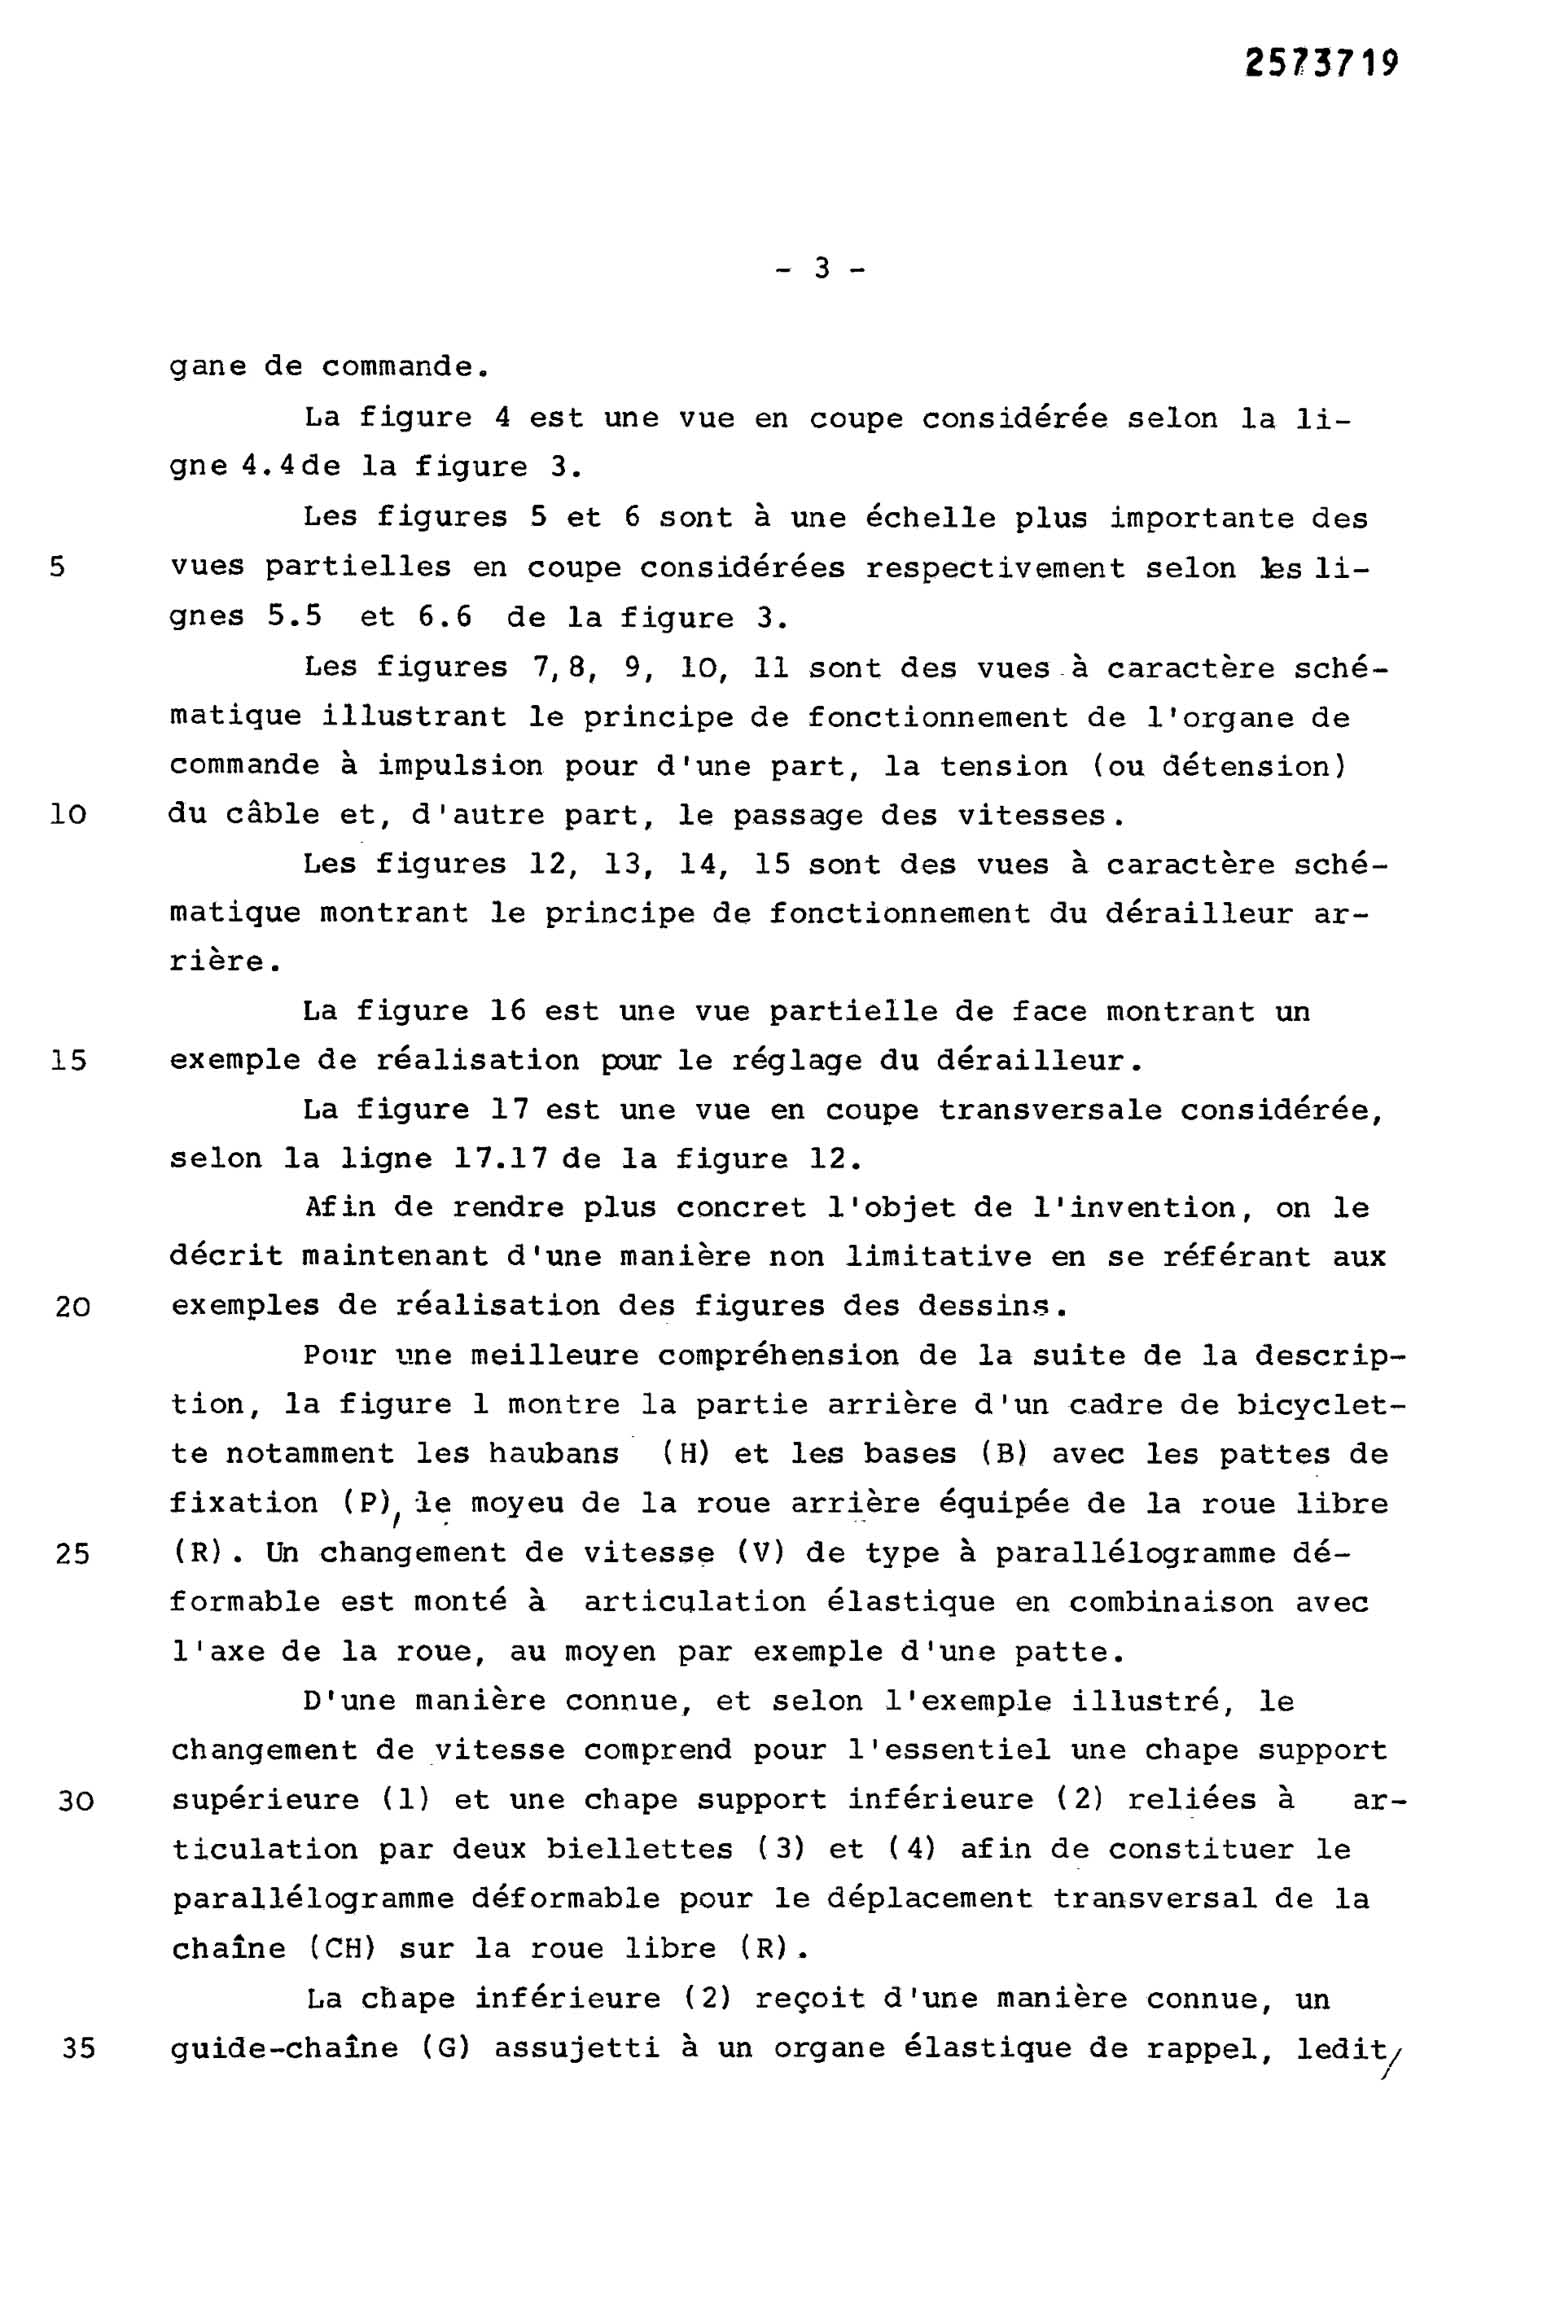 French Patent 2,573,719 - Simplex scan 004 main image